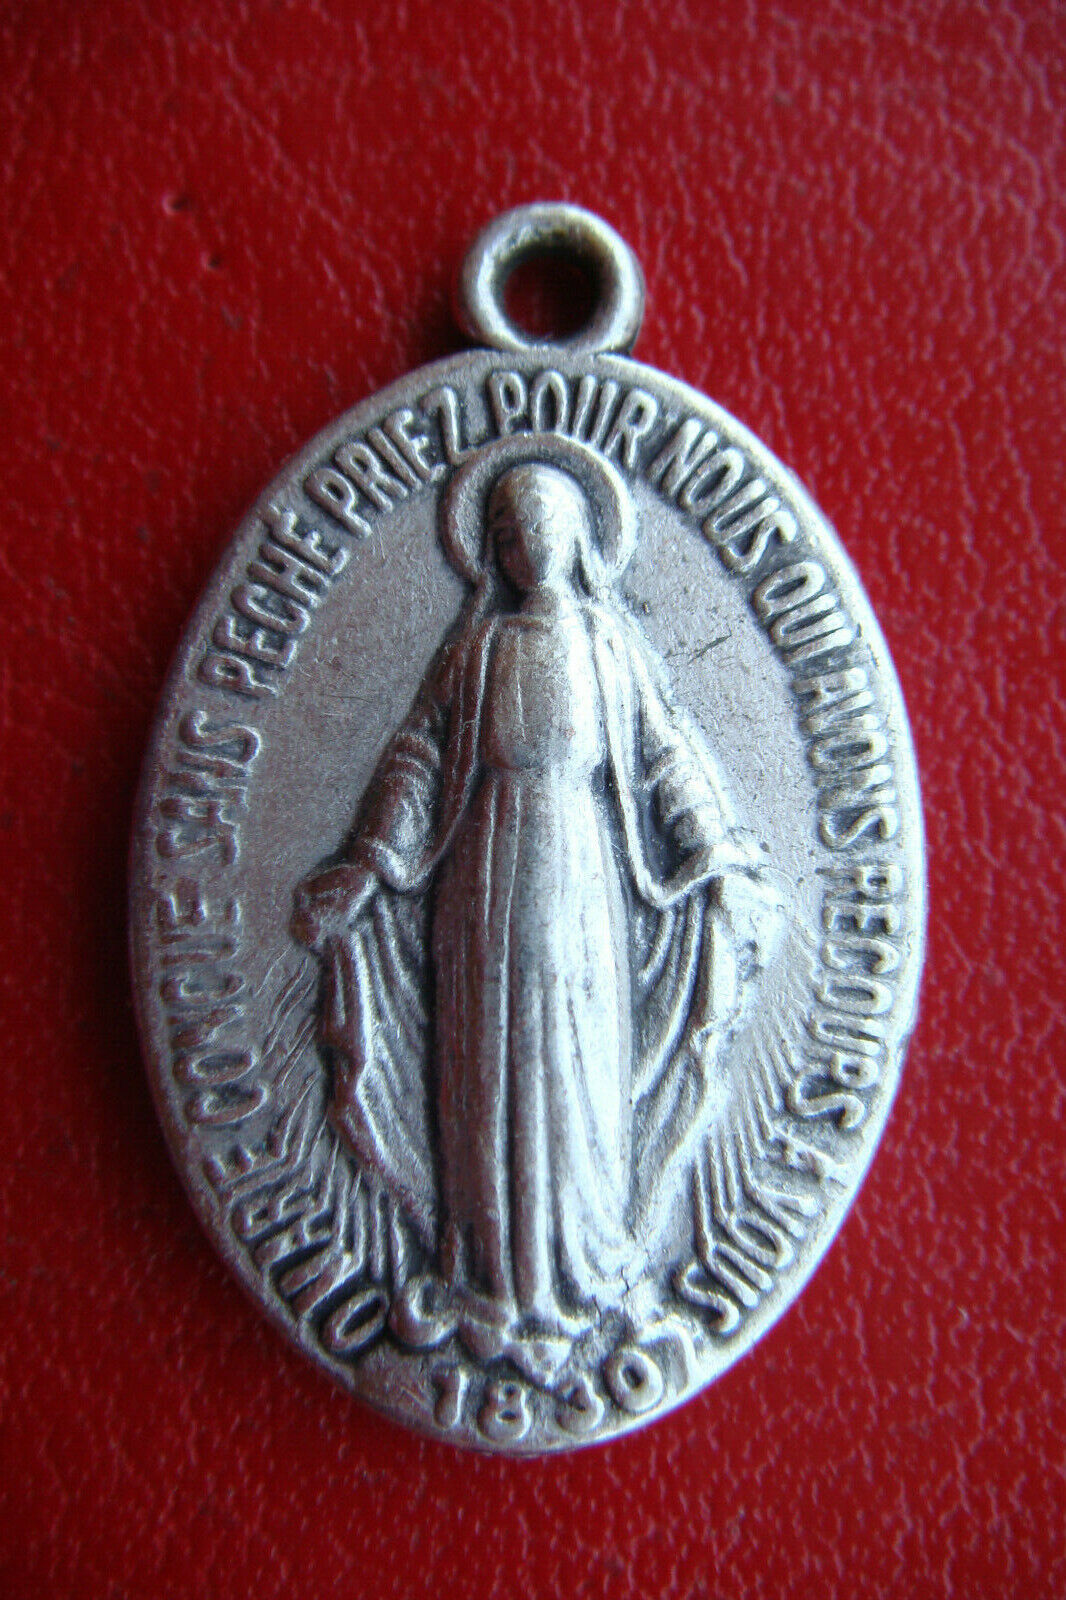 VIRGIN MARY IMMACULATE CONCEPTION OLD VINTAGE RELIGIOUS MEDAL PENDANT